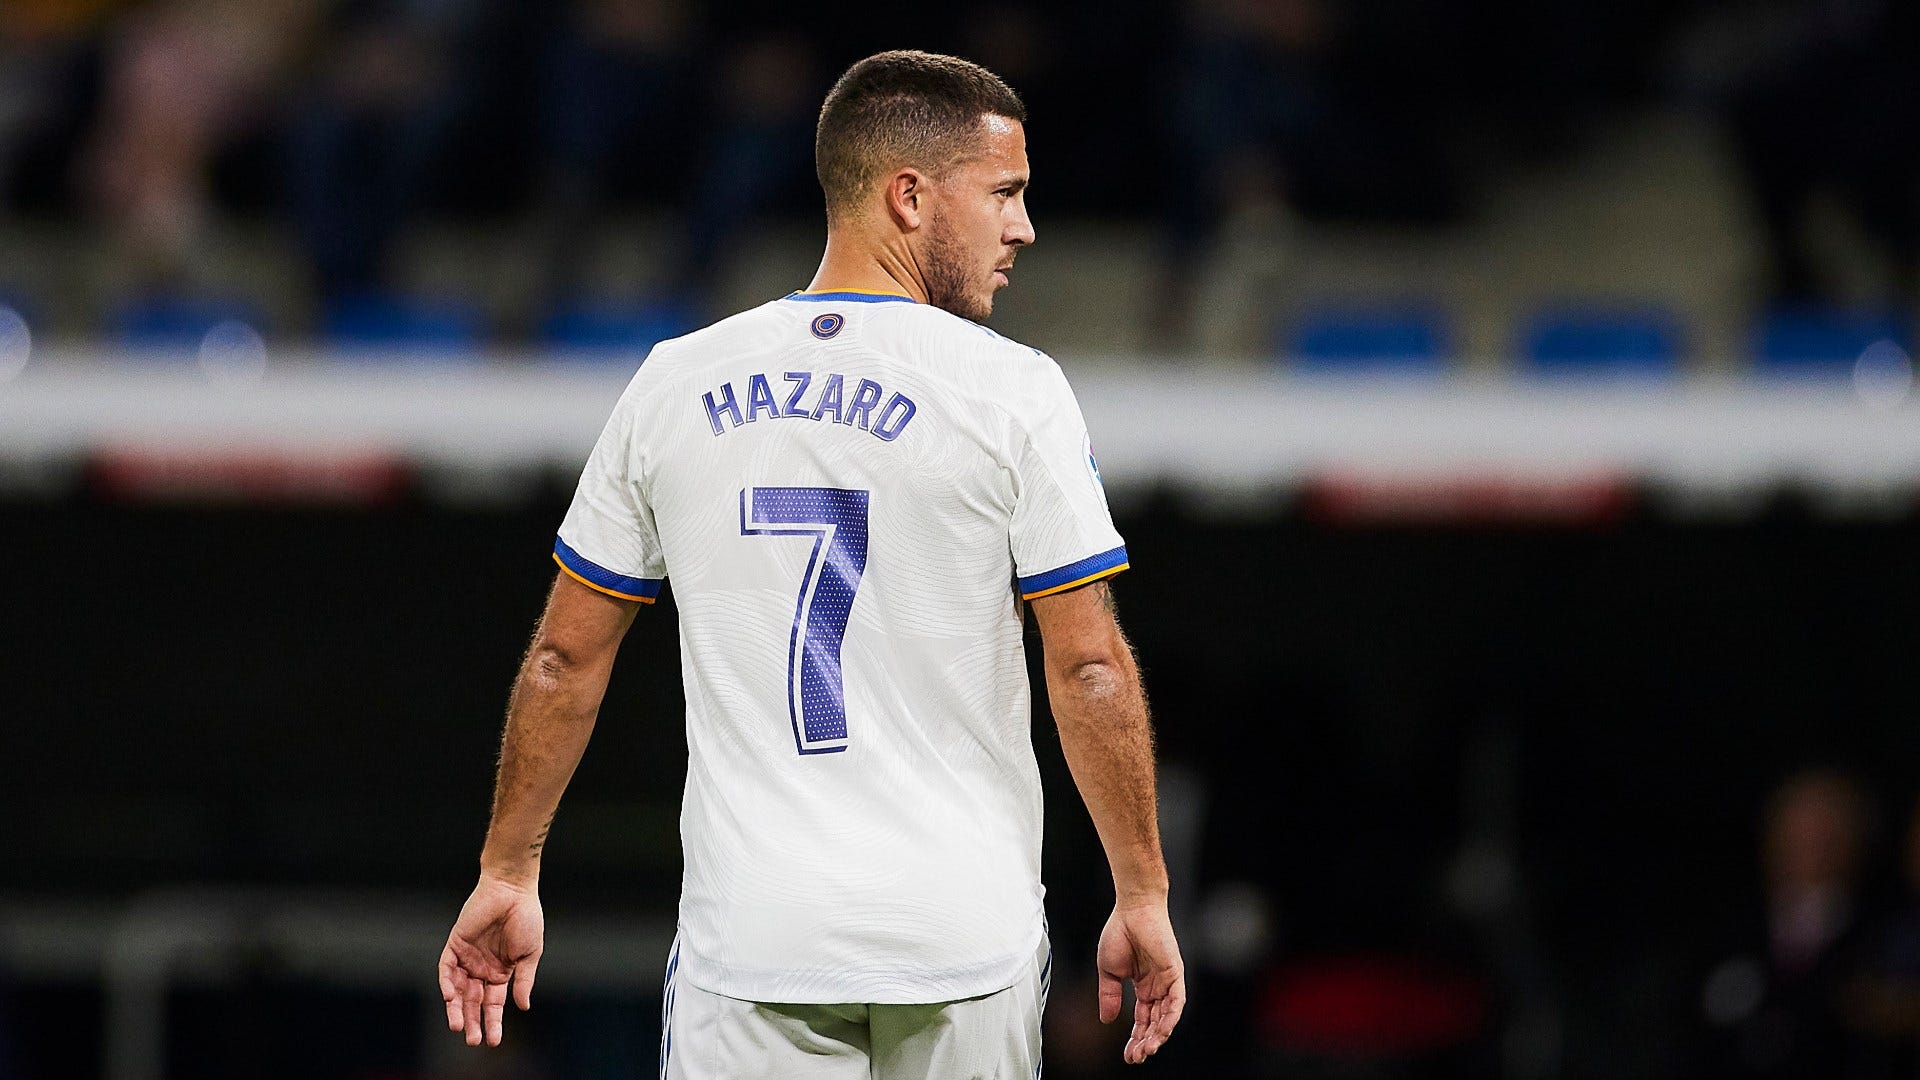 Eden Hazard: Real Madrid to release former Chelsea forward at end of June, Football News